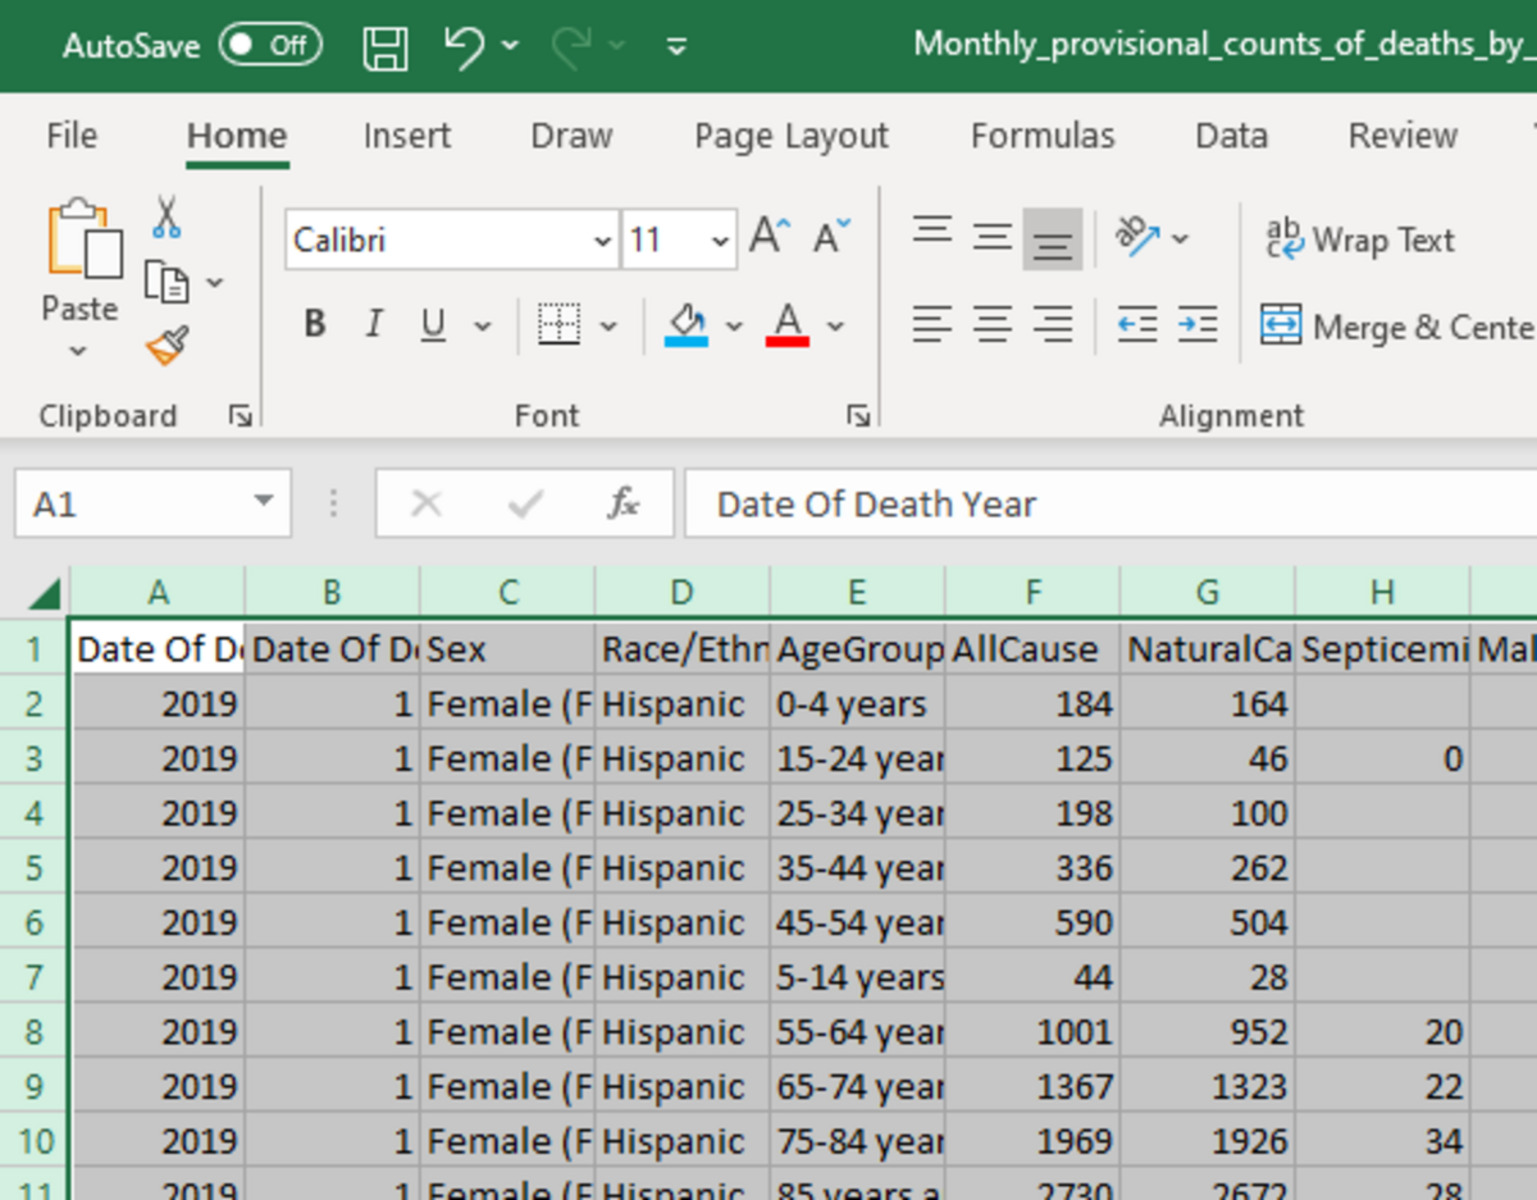 how-to-copy-a-sheet-in-excel